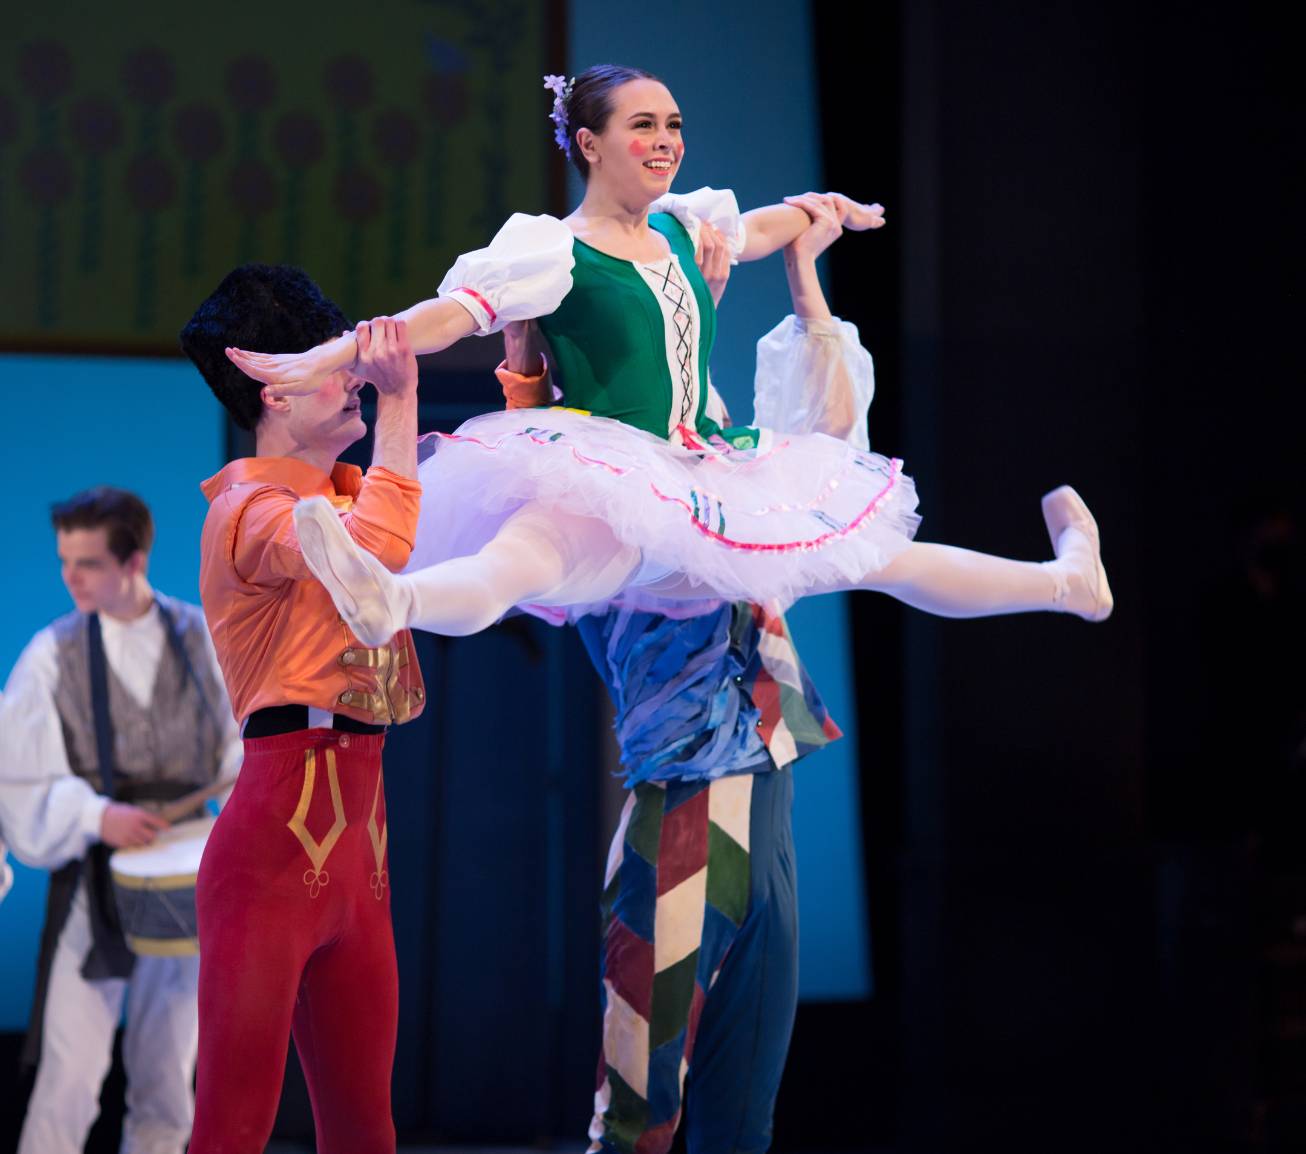 Ballerina being tossed in the air by two other students on stage during performance